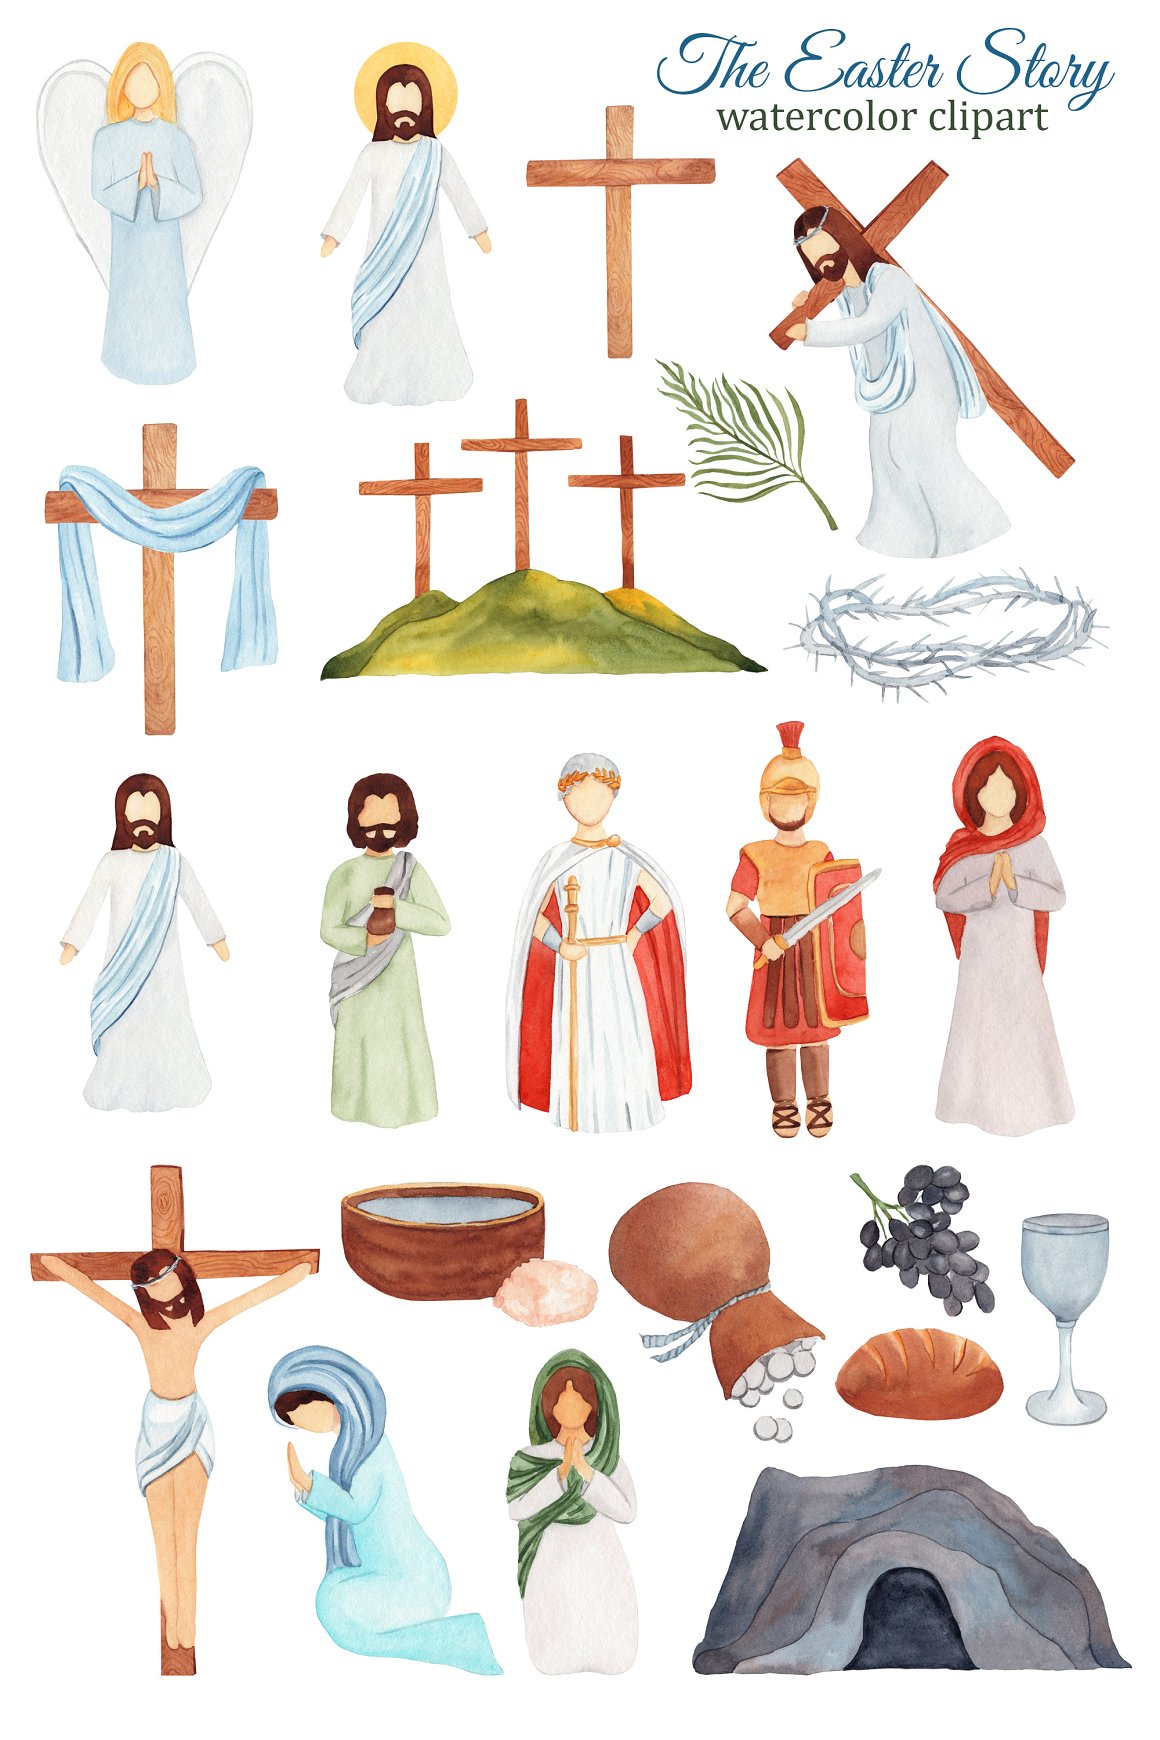 Crucifixion, warrior and others.